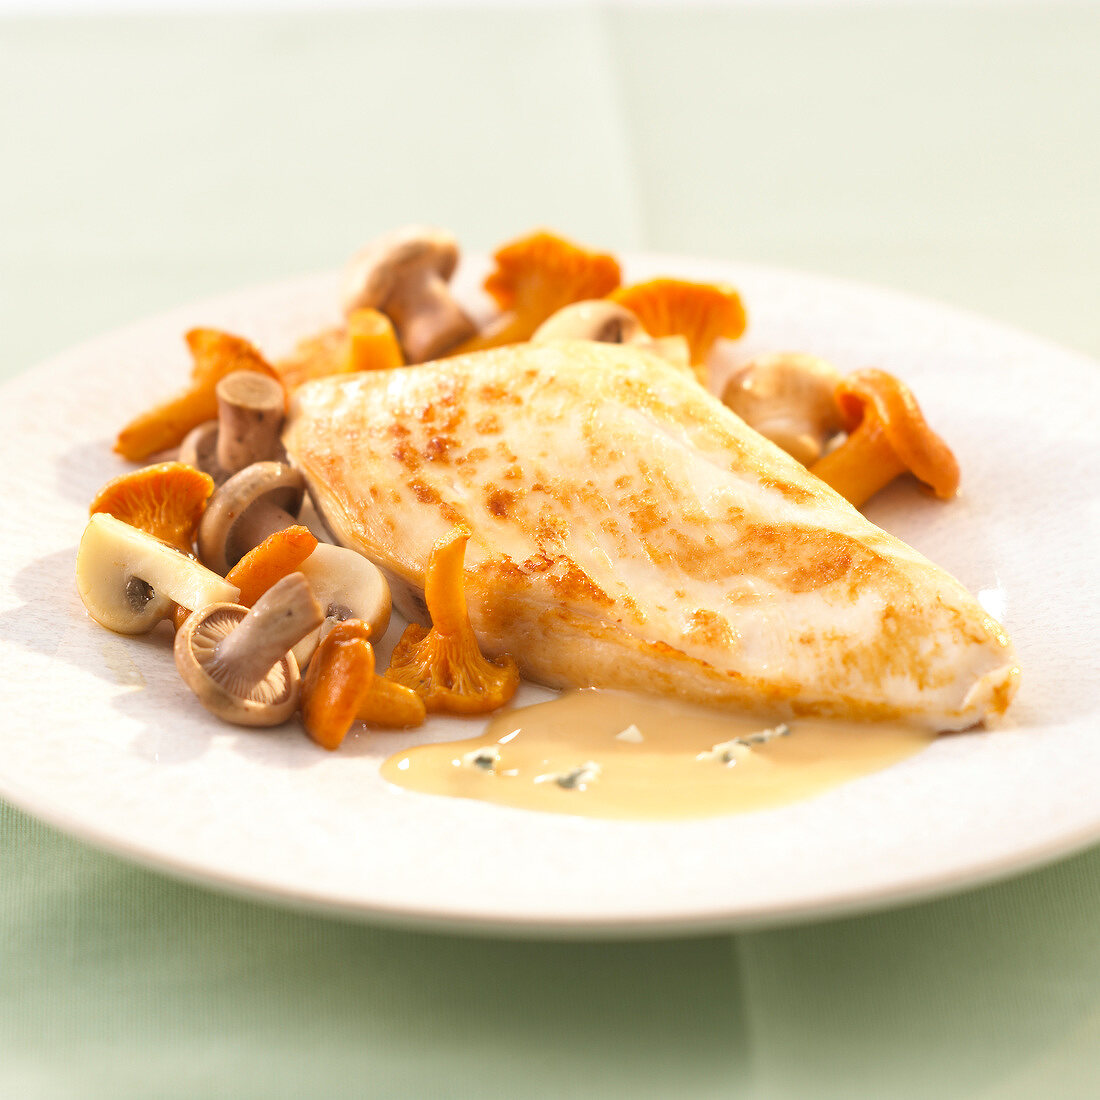 Chicken escalope with mixed mushrooms and creamy sauce